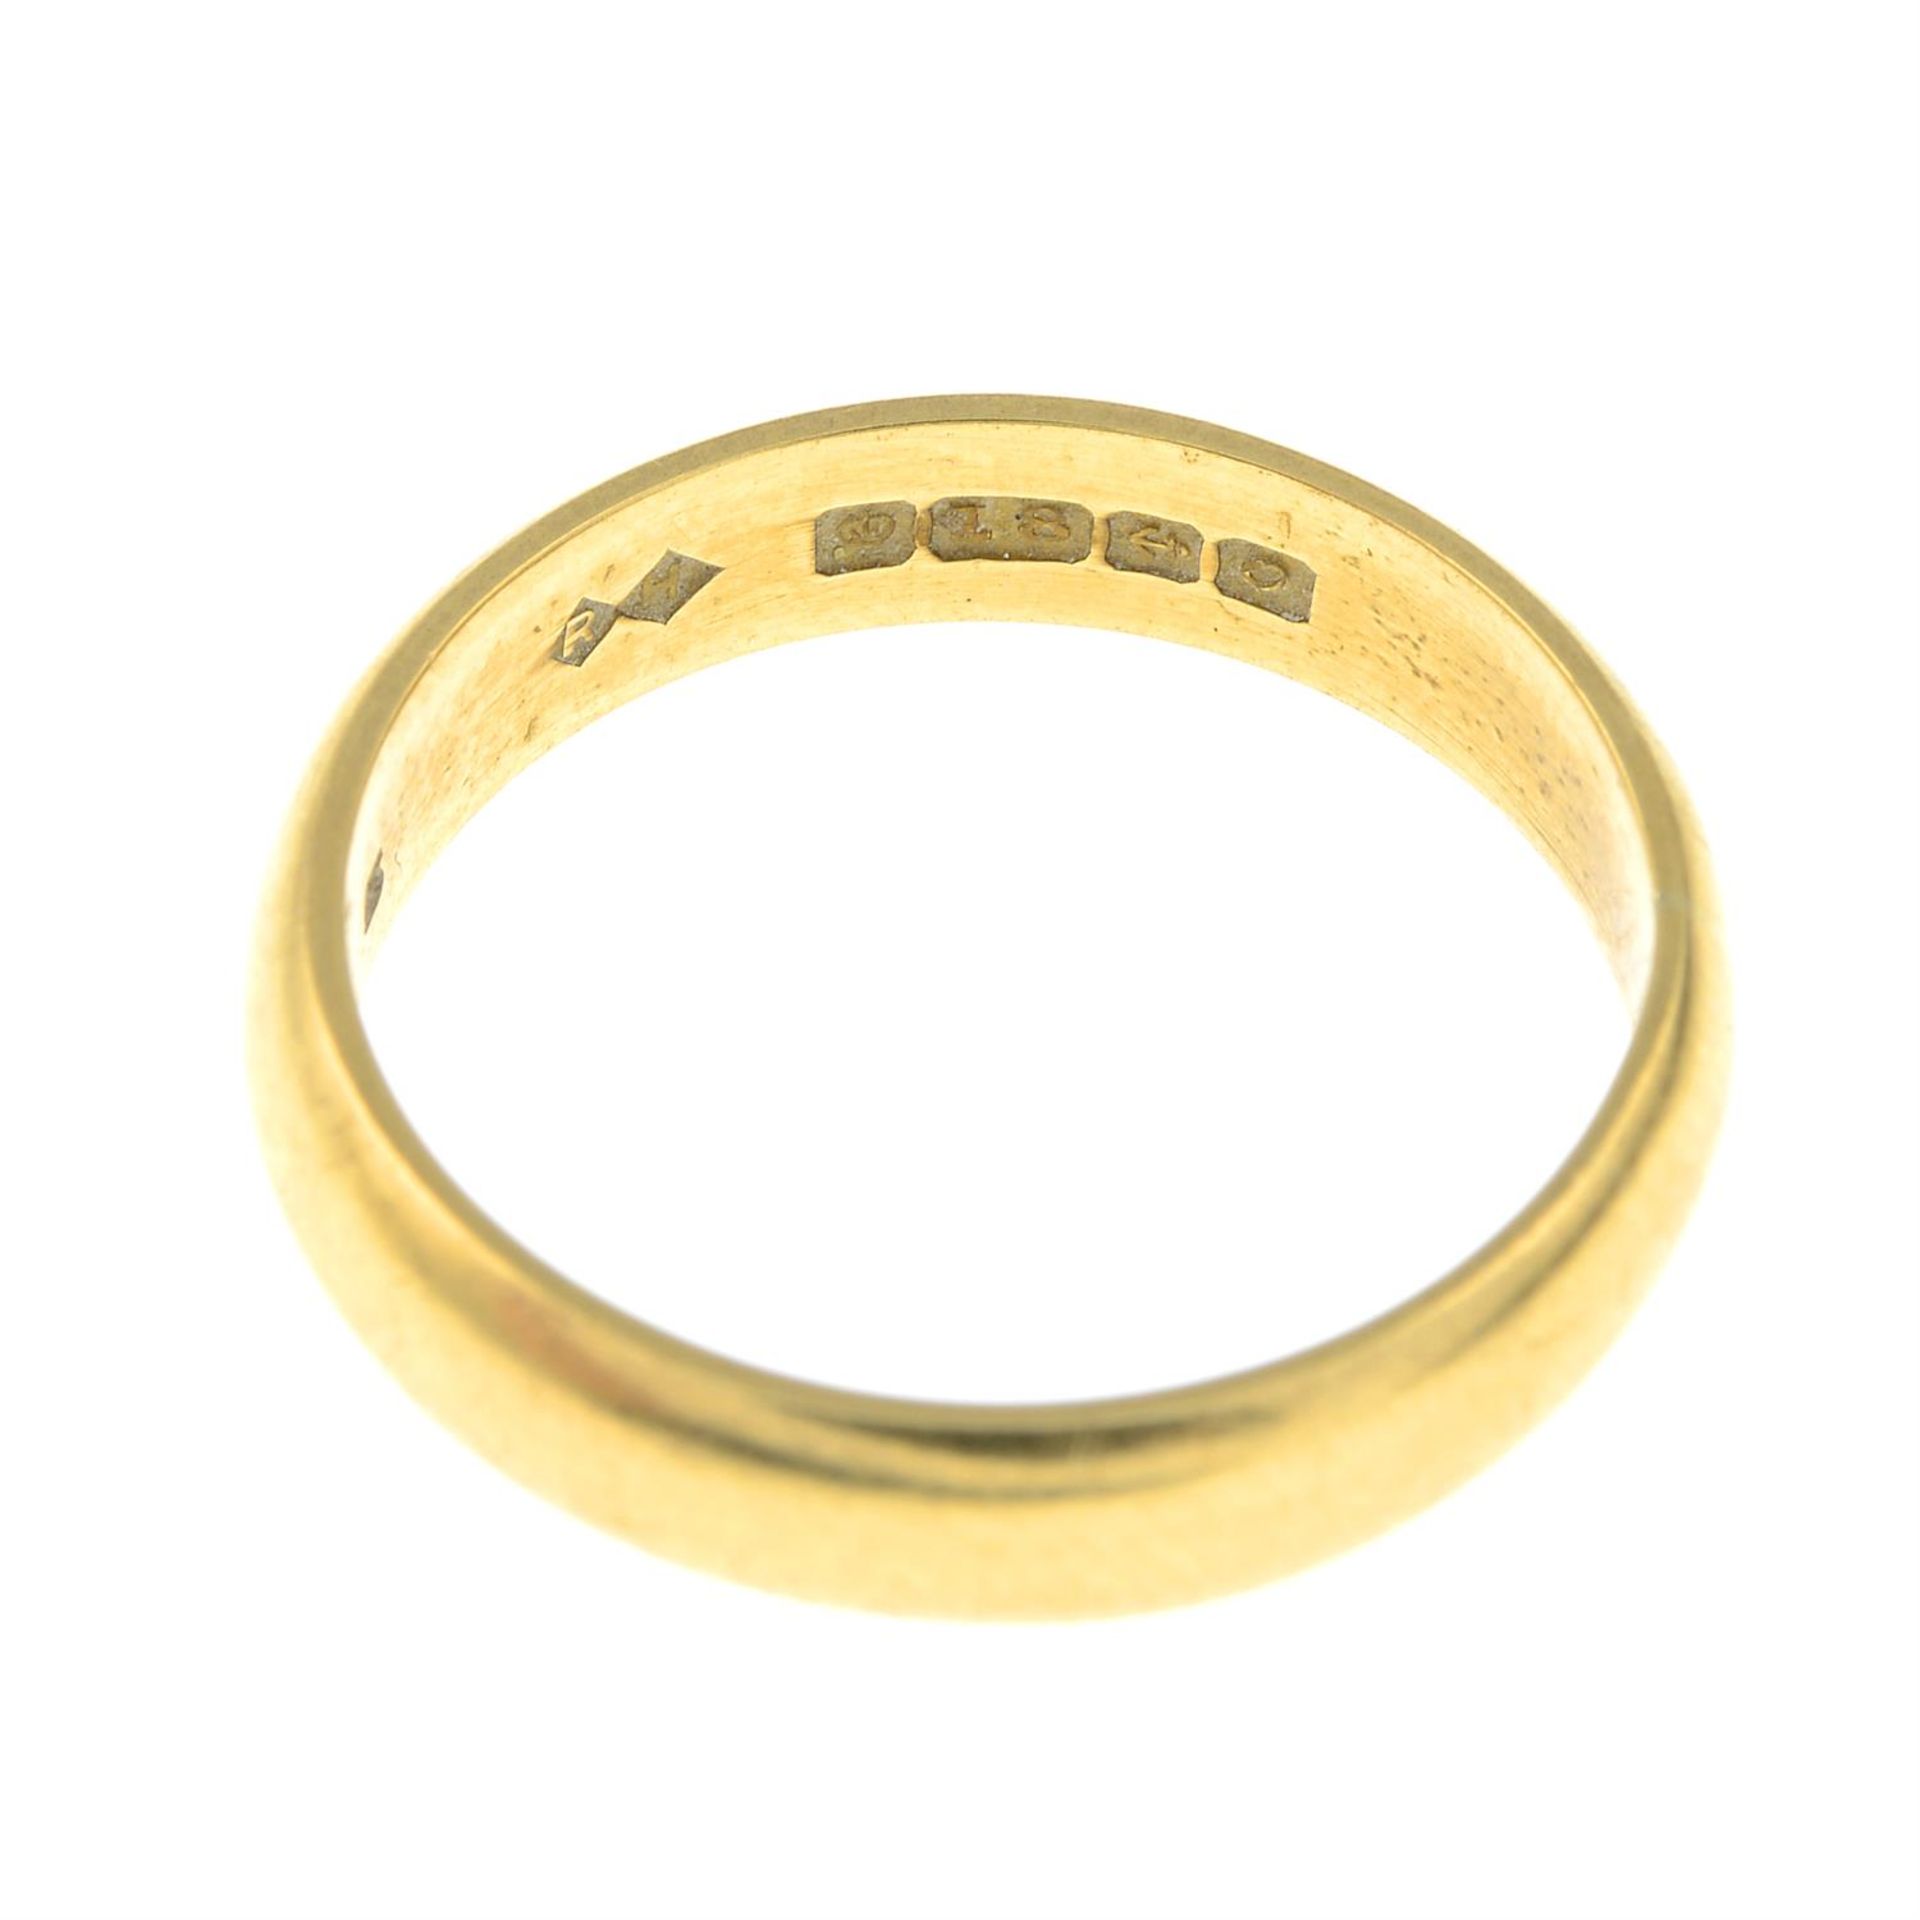 An 18ct gold plain band ring. - Image 2 of 2